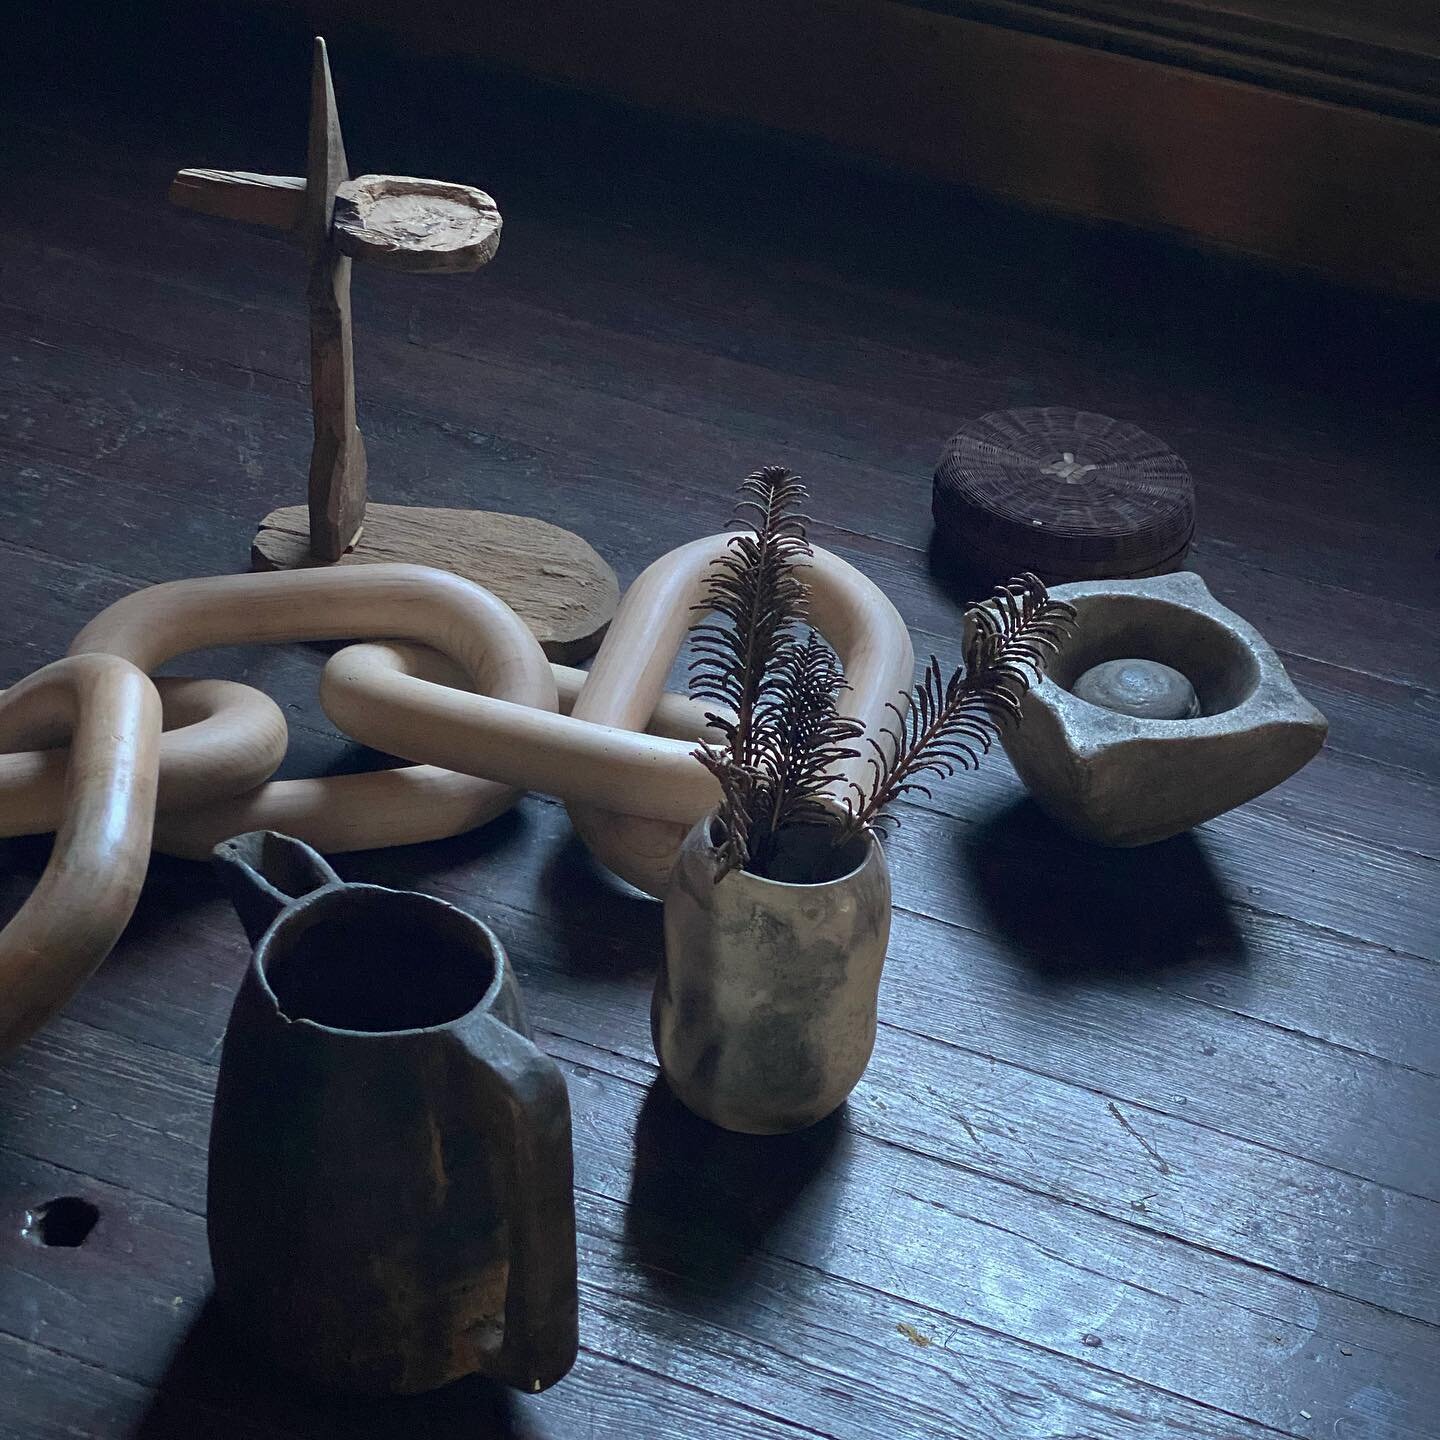 Gathering objects for some interior styling. 
Wooden link chain @mybloomist 
Antique objects are from my own collection.
.
.
.
#interiorstyling #interiordesign #stilllife #stillleben #oldandnew #objects #designobject #mybloomist